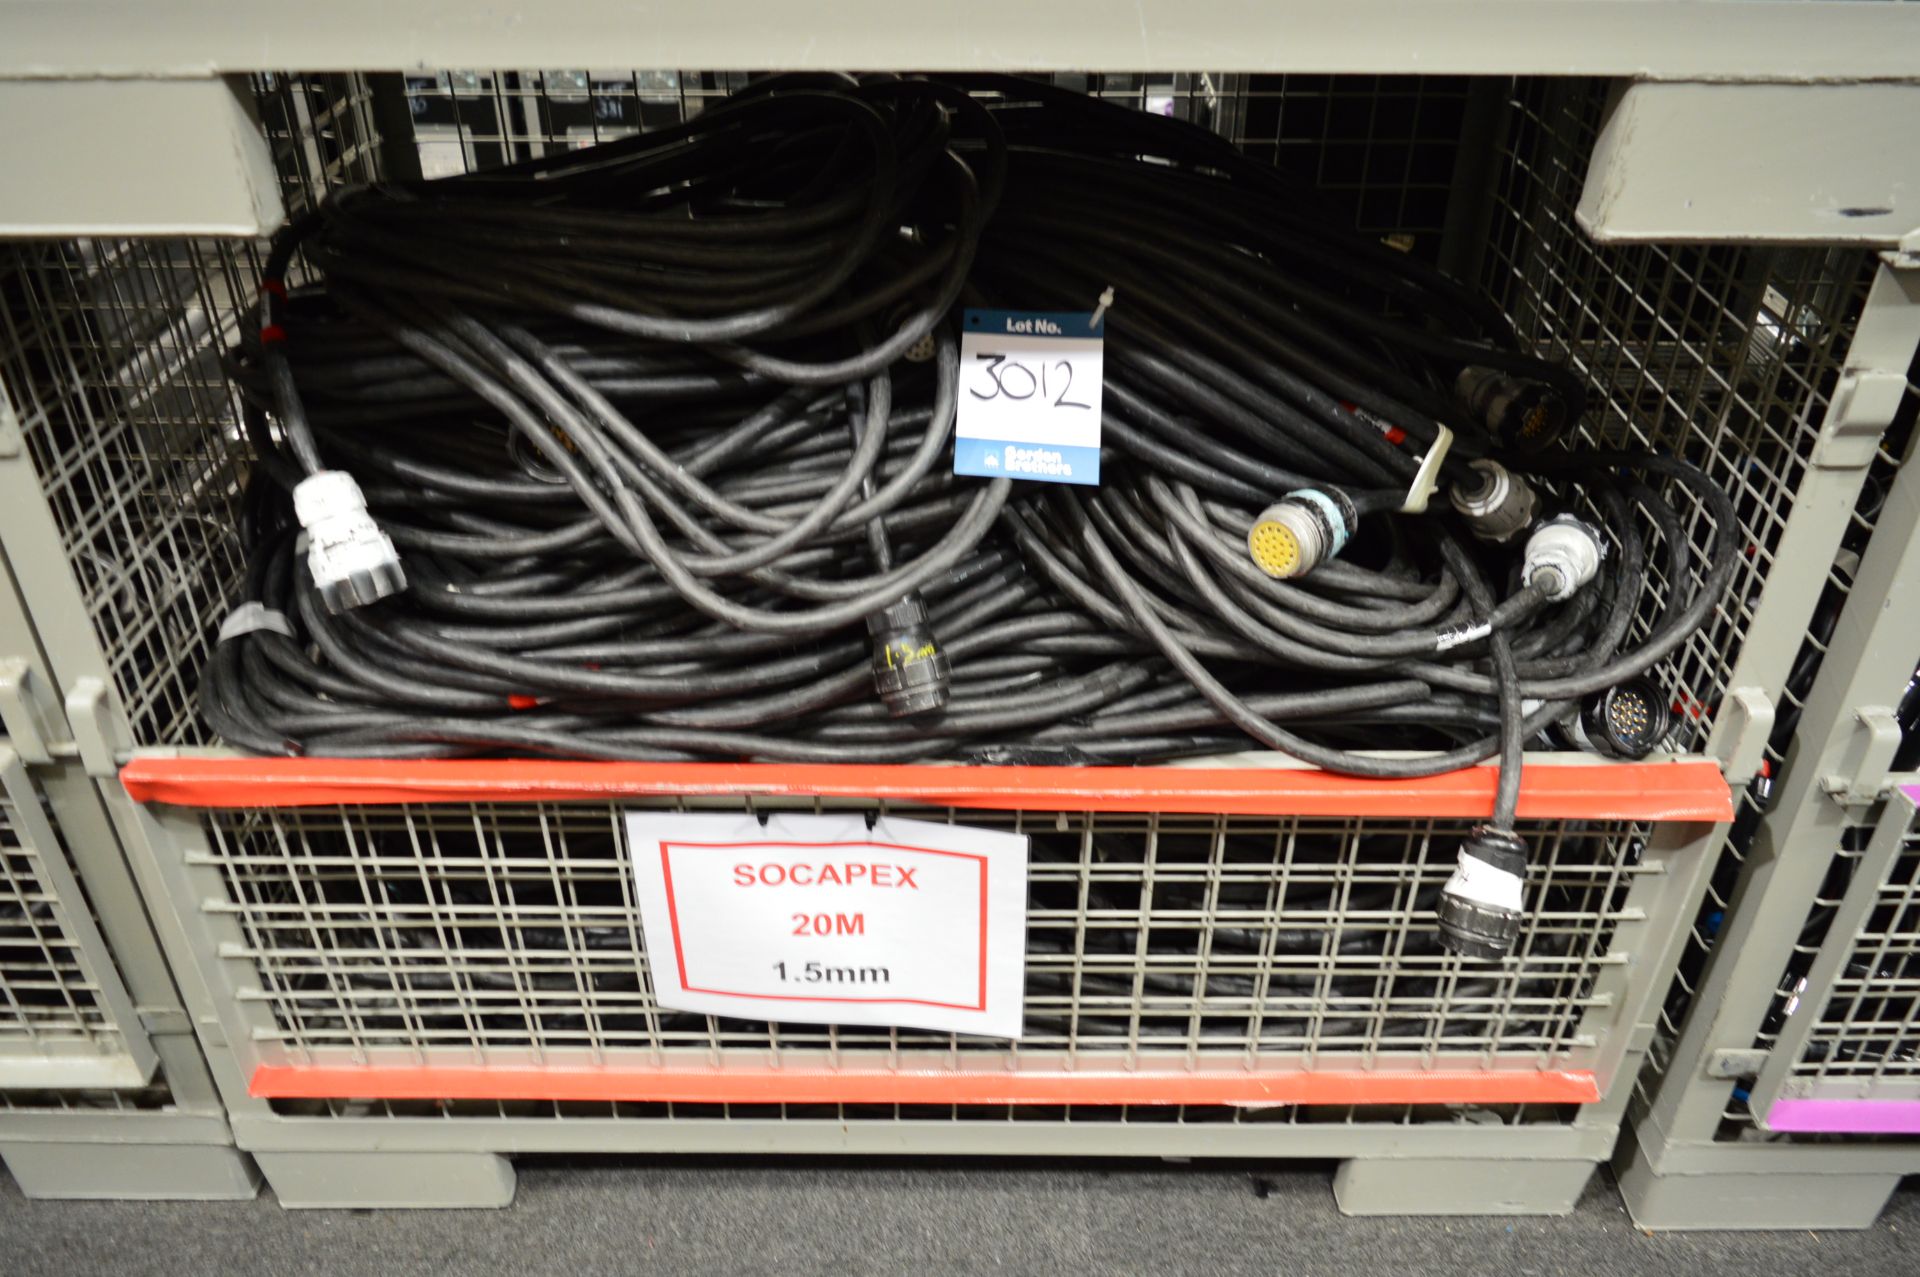 Quantity of 20m / 1.5mm Socapex cables (stillage not included): Unit 500, Eckersall Road, Birmingham